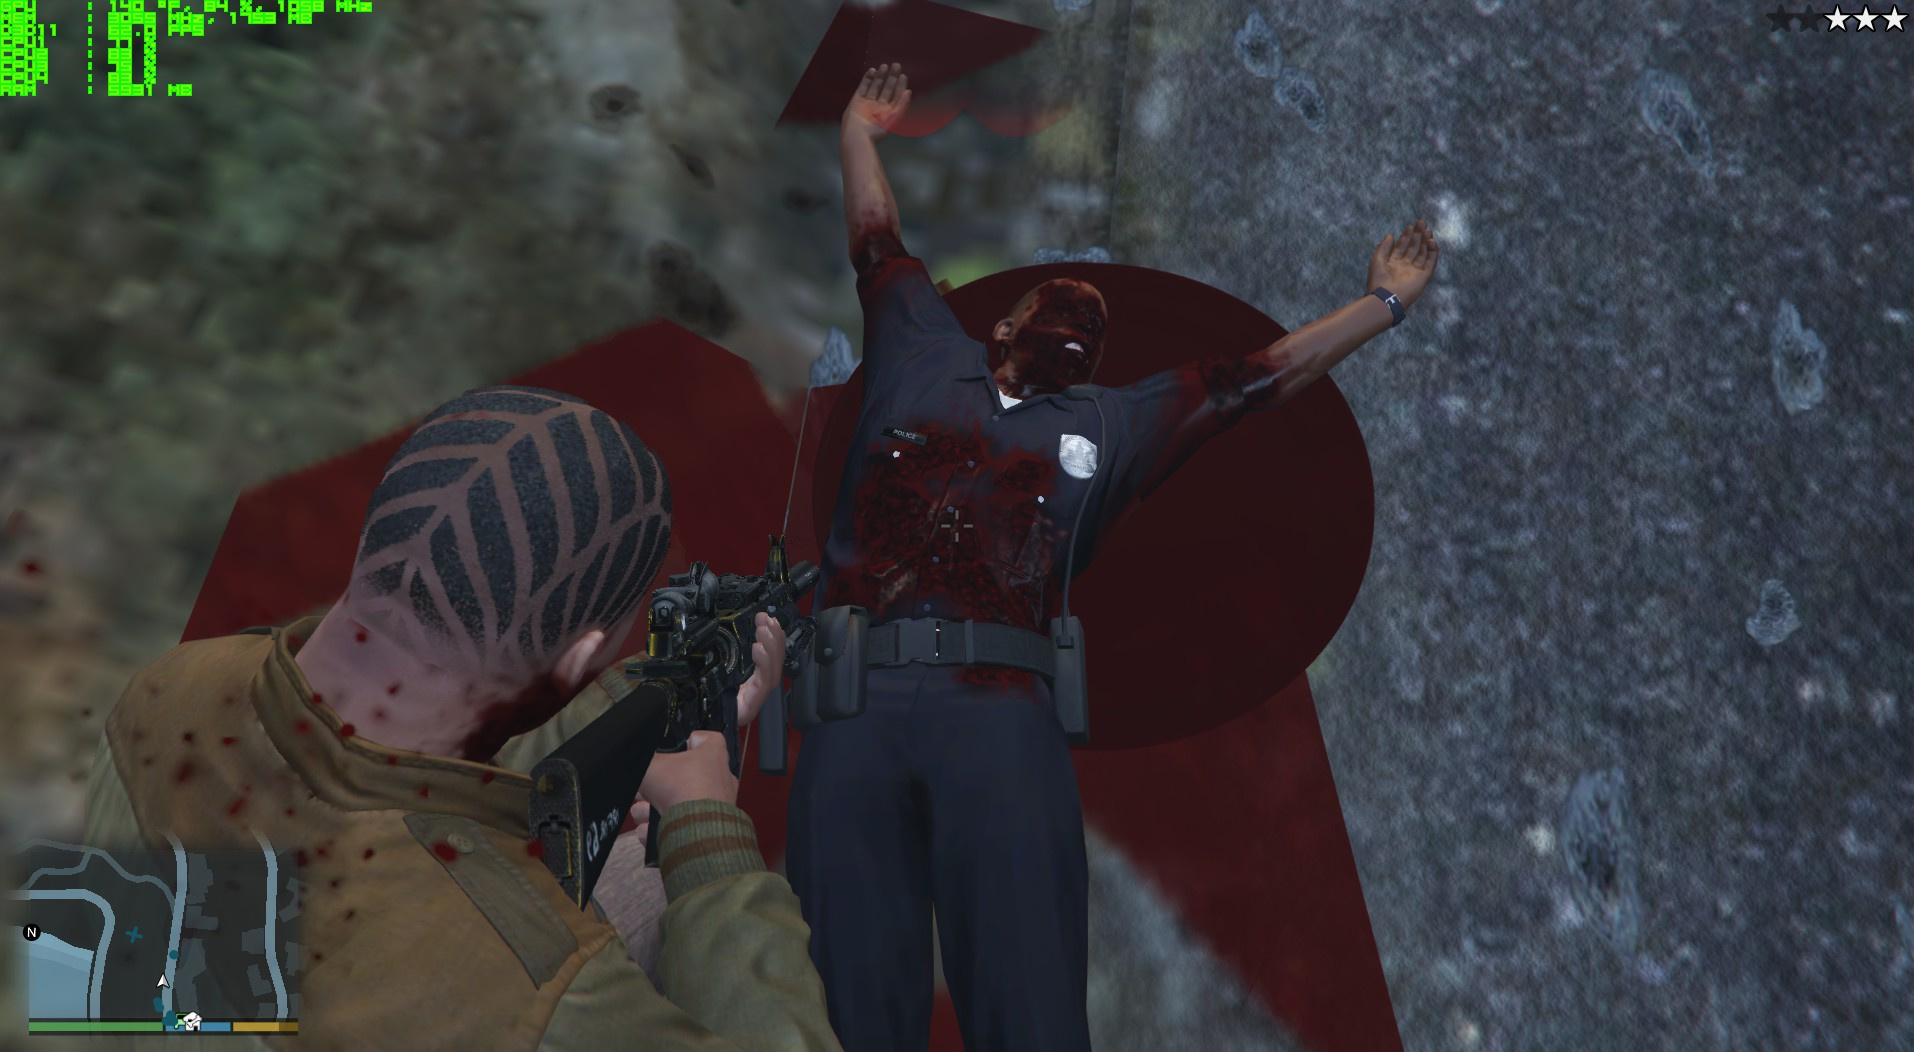 Blood and gore for gta 5 фото 37